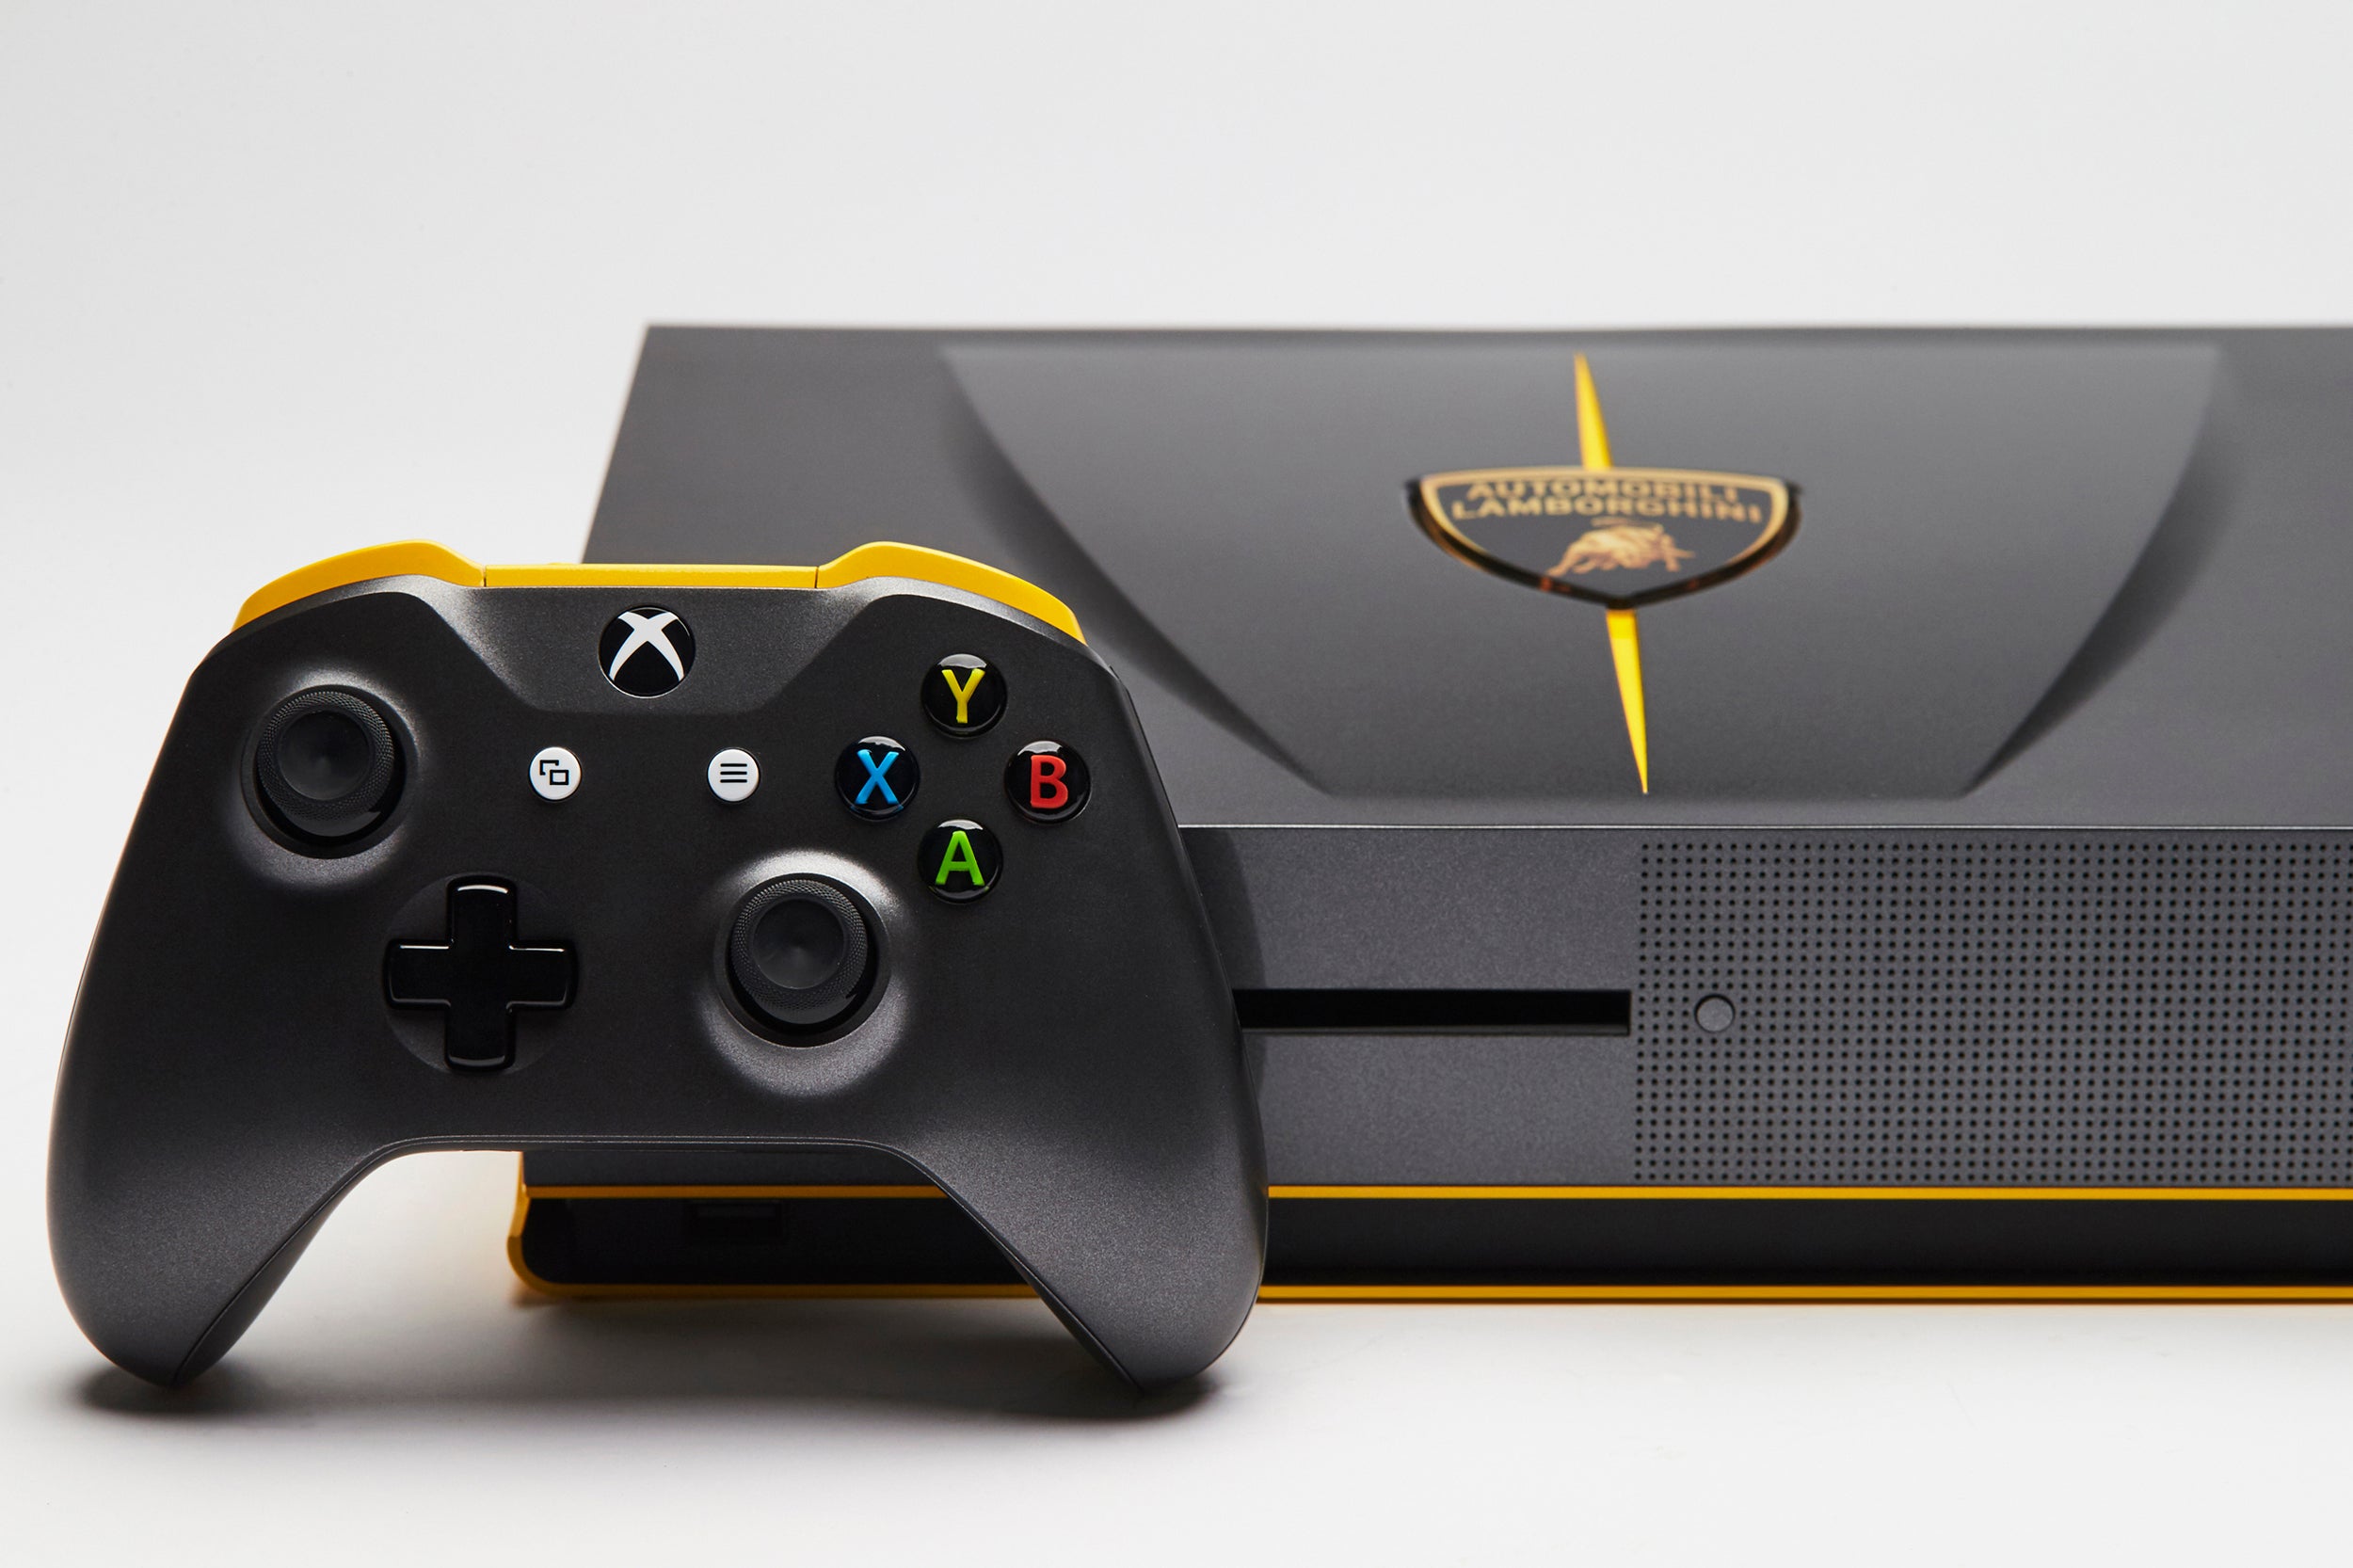 Image for One-of-a-kind Lamborghini Centenario Xbox One S is droolworthy